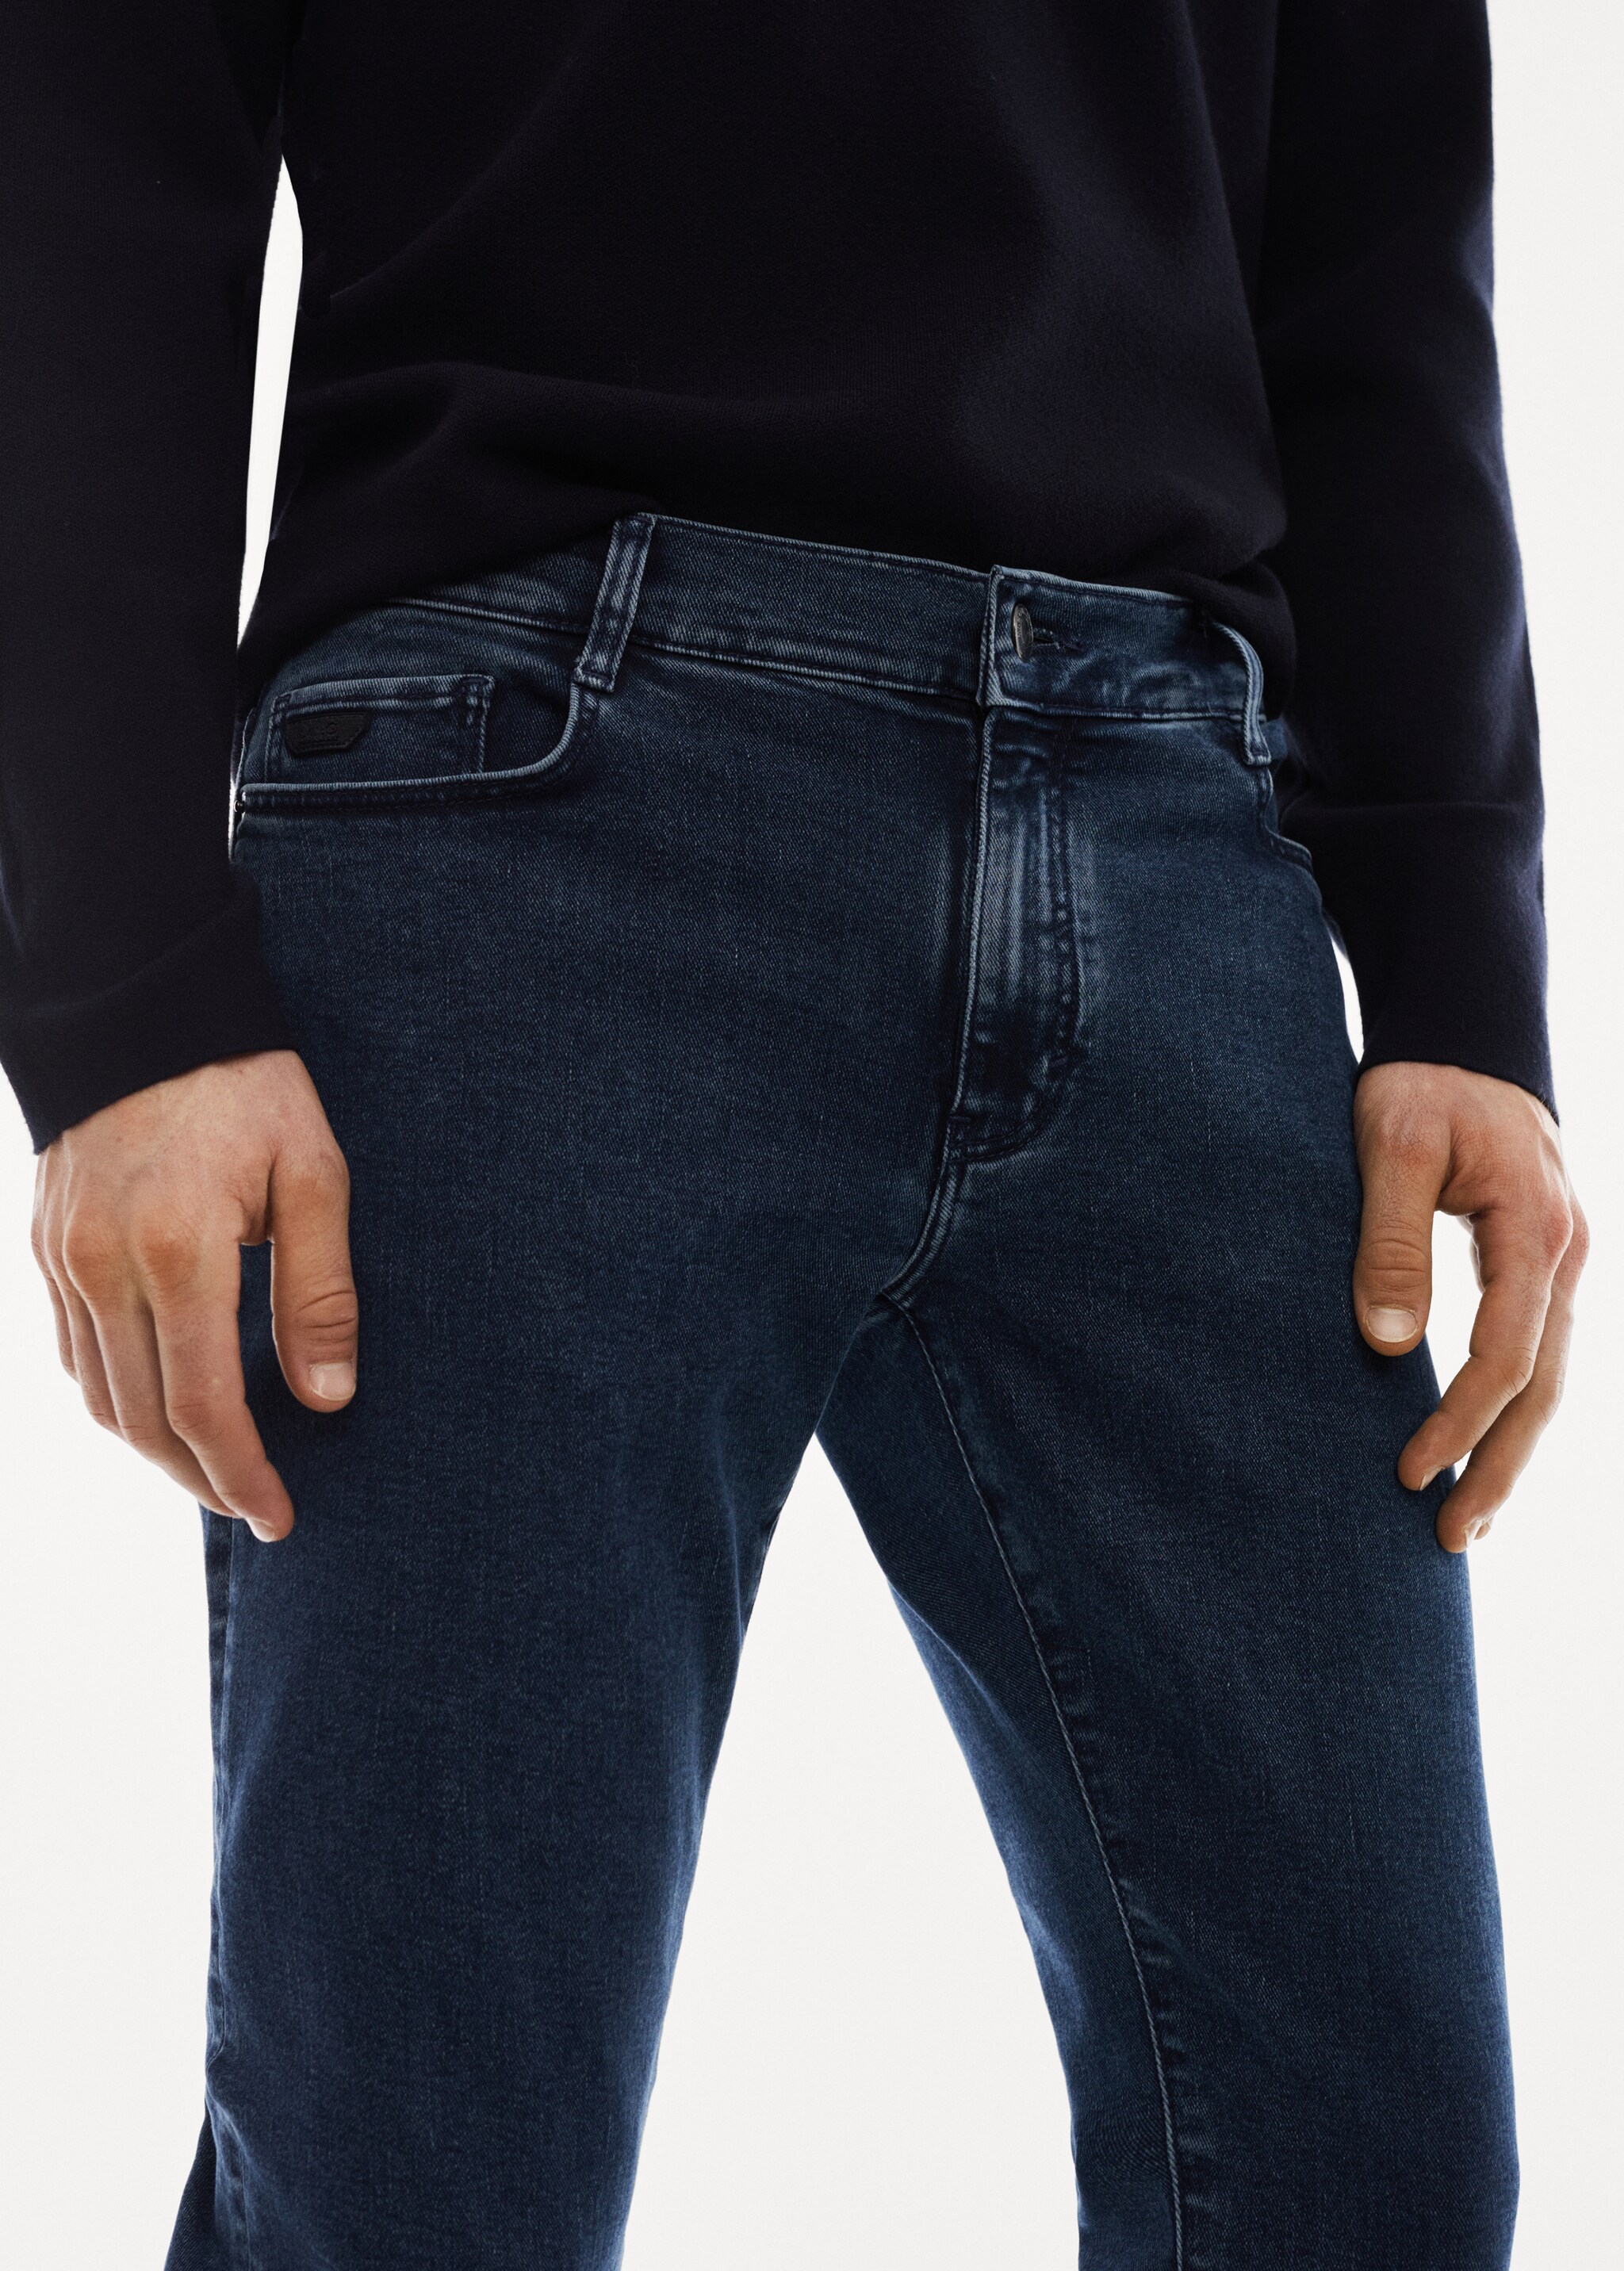 THERMOLITE® slim-fit jeans - Details of the article 1